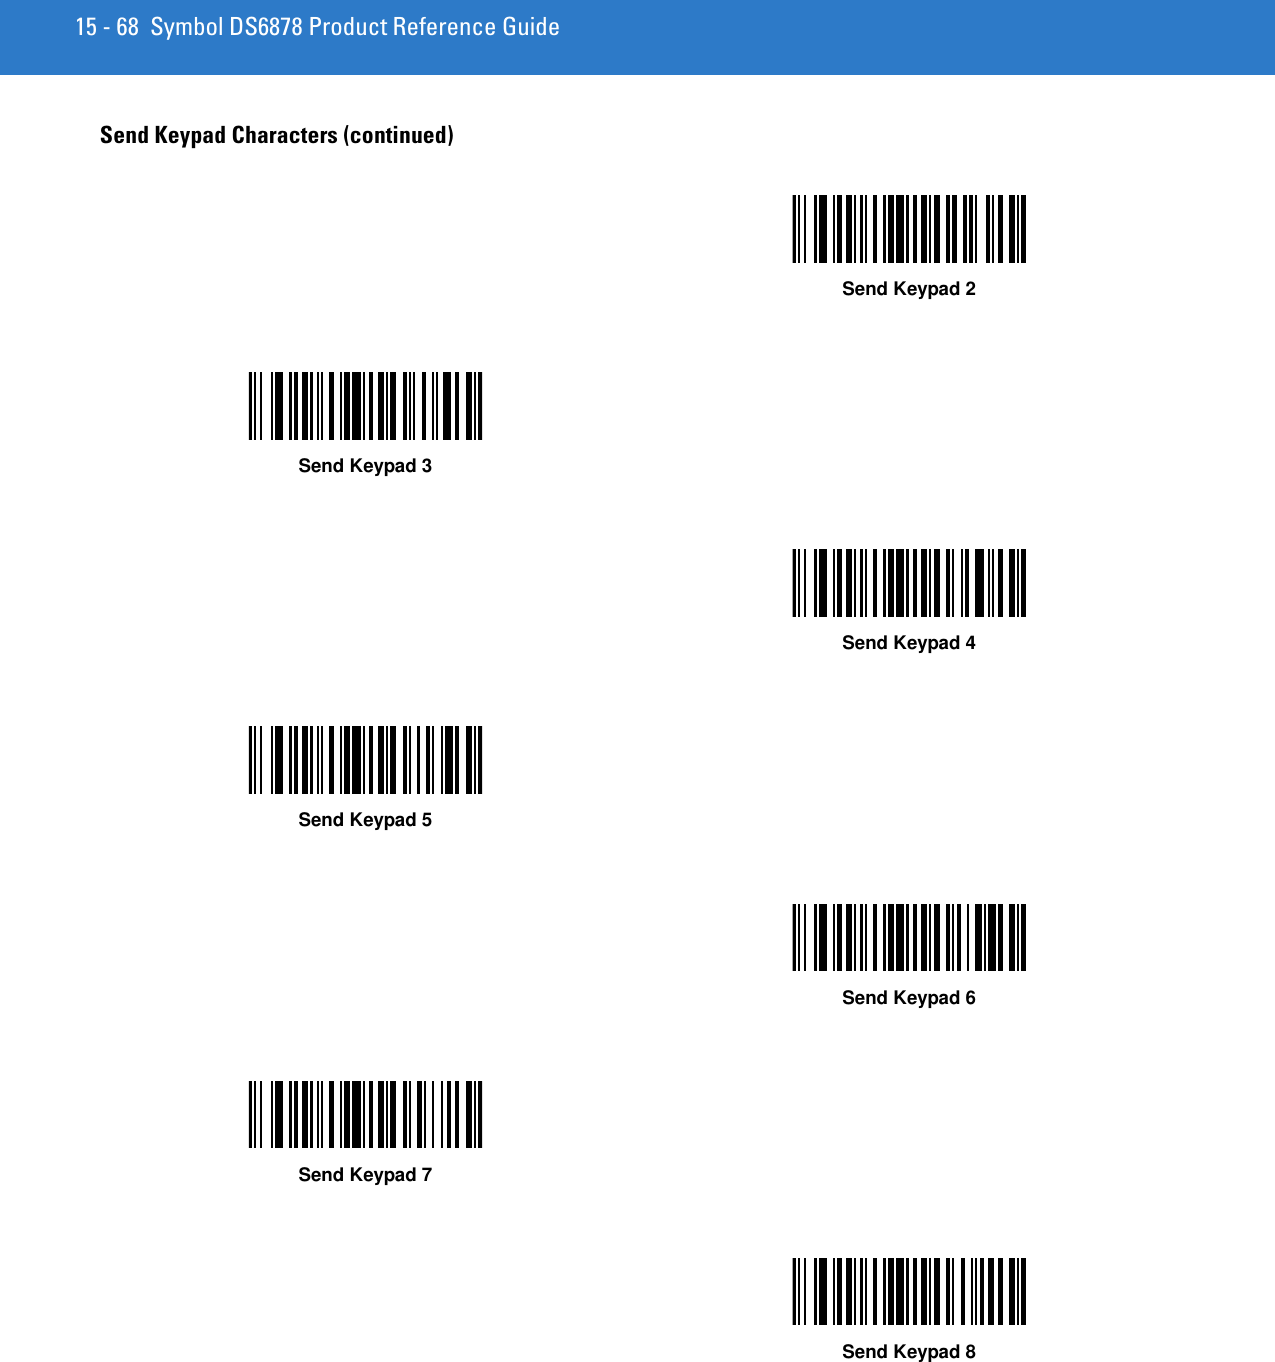 15 - 68 Symbol DS6878 Product Reference GuideSend Keypad Characters (continued)Send Keypad 2Send Keypad 3Send Keypad 4Send Keypad 5Send Keypad 6Send Keypad 7Send Keypad 8